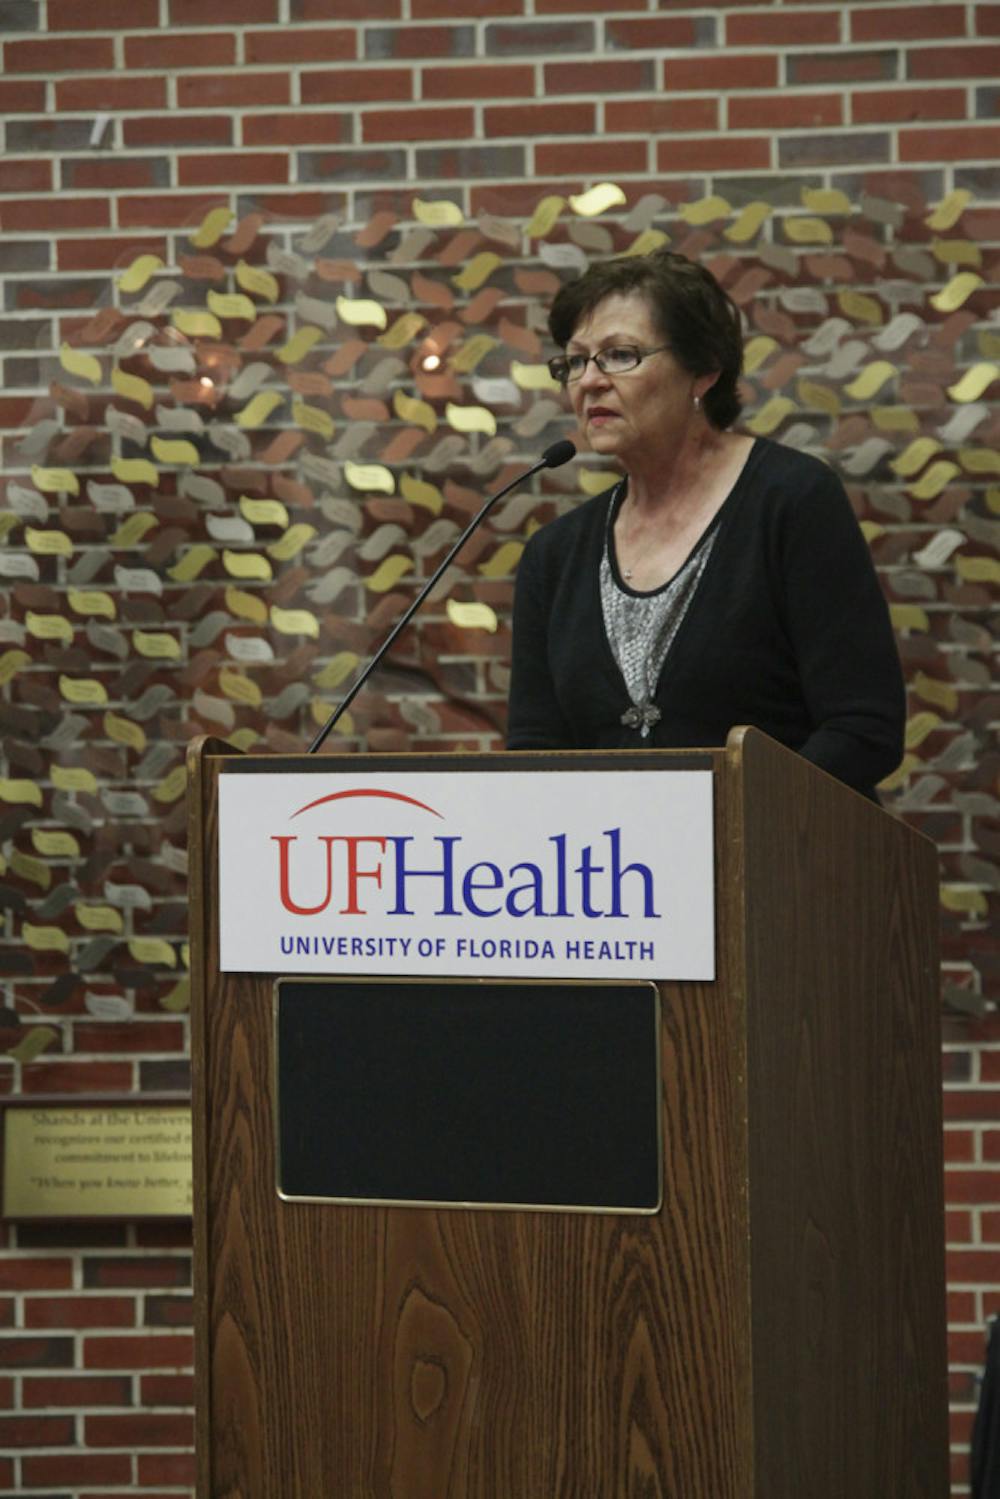 <p class="p1"><span class="s1">Lilly Rooks, a stroke survivor and former patient at UF Health Shands Hospital, addresses the crowd gathered at the celebration reception at UF Health Shands Hospital on Monday. </span></p>